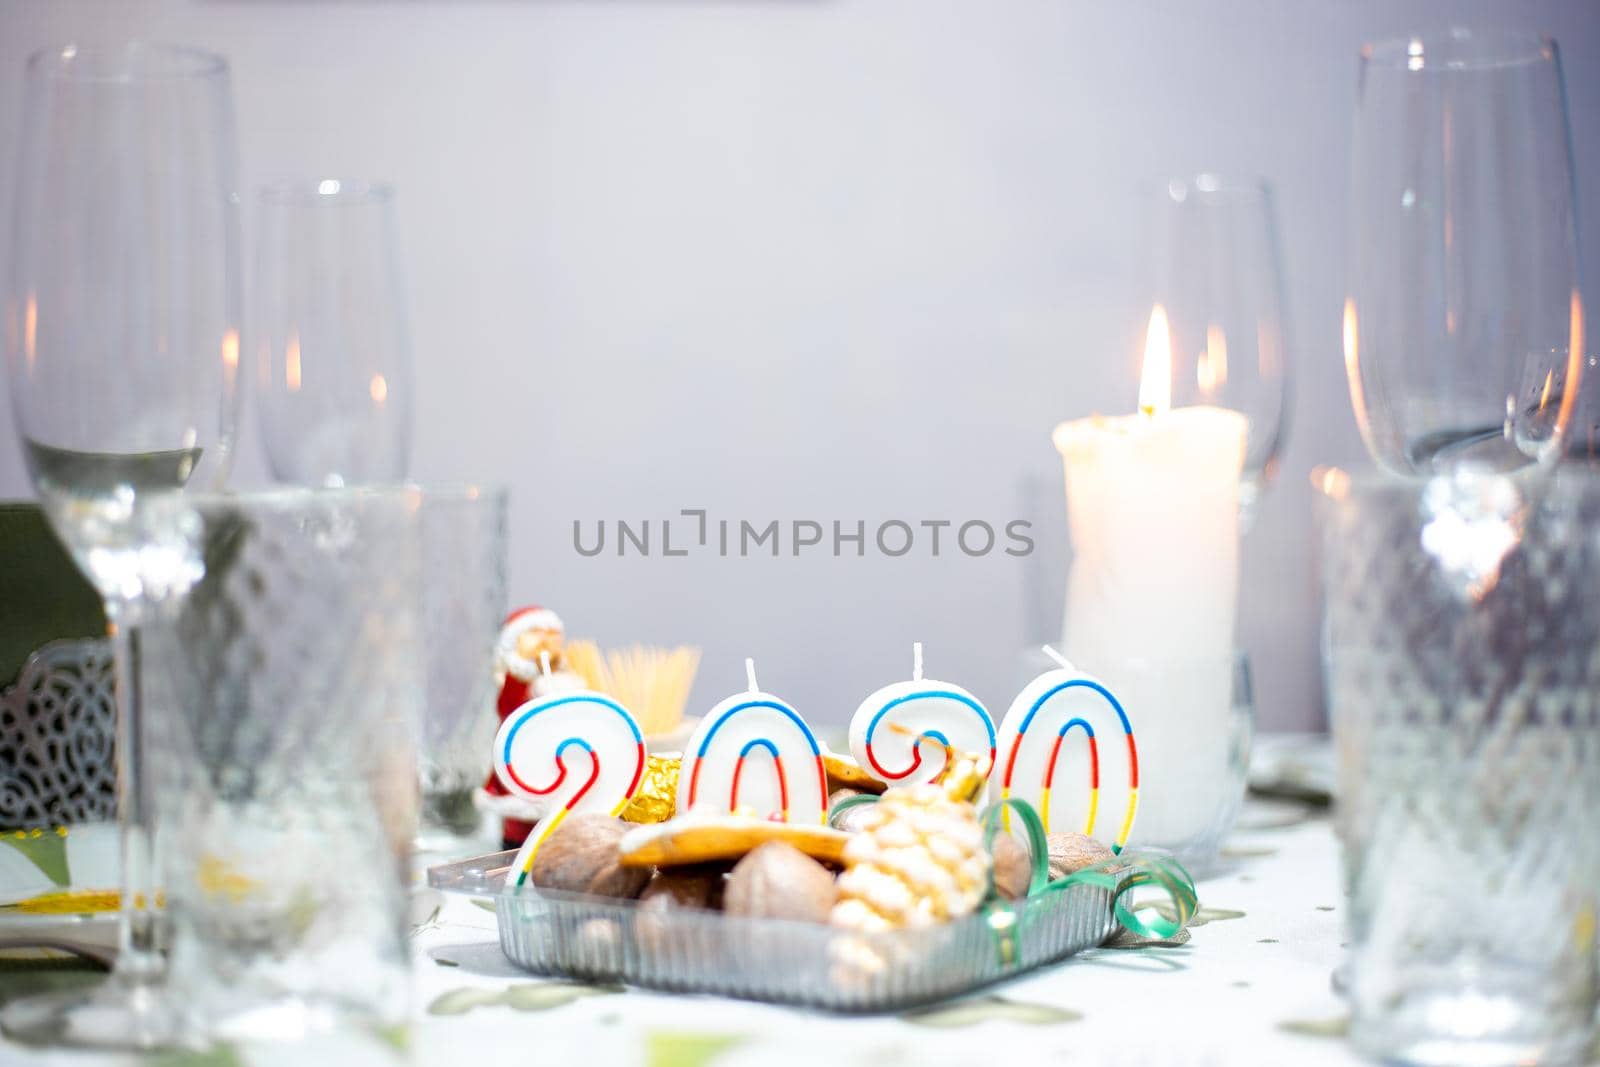 Christmas table with utensils and glasses, a table with burning candles, in a dark room